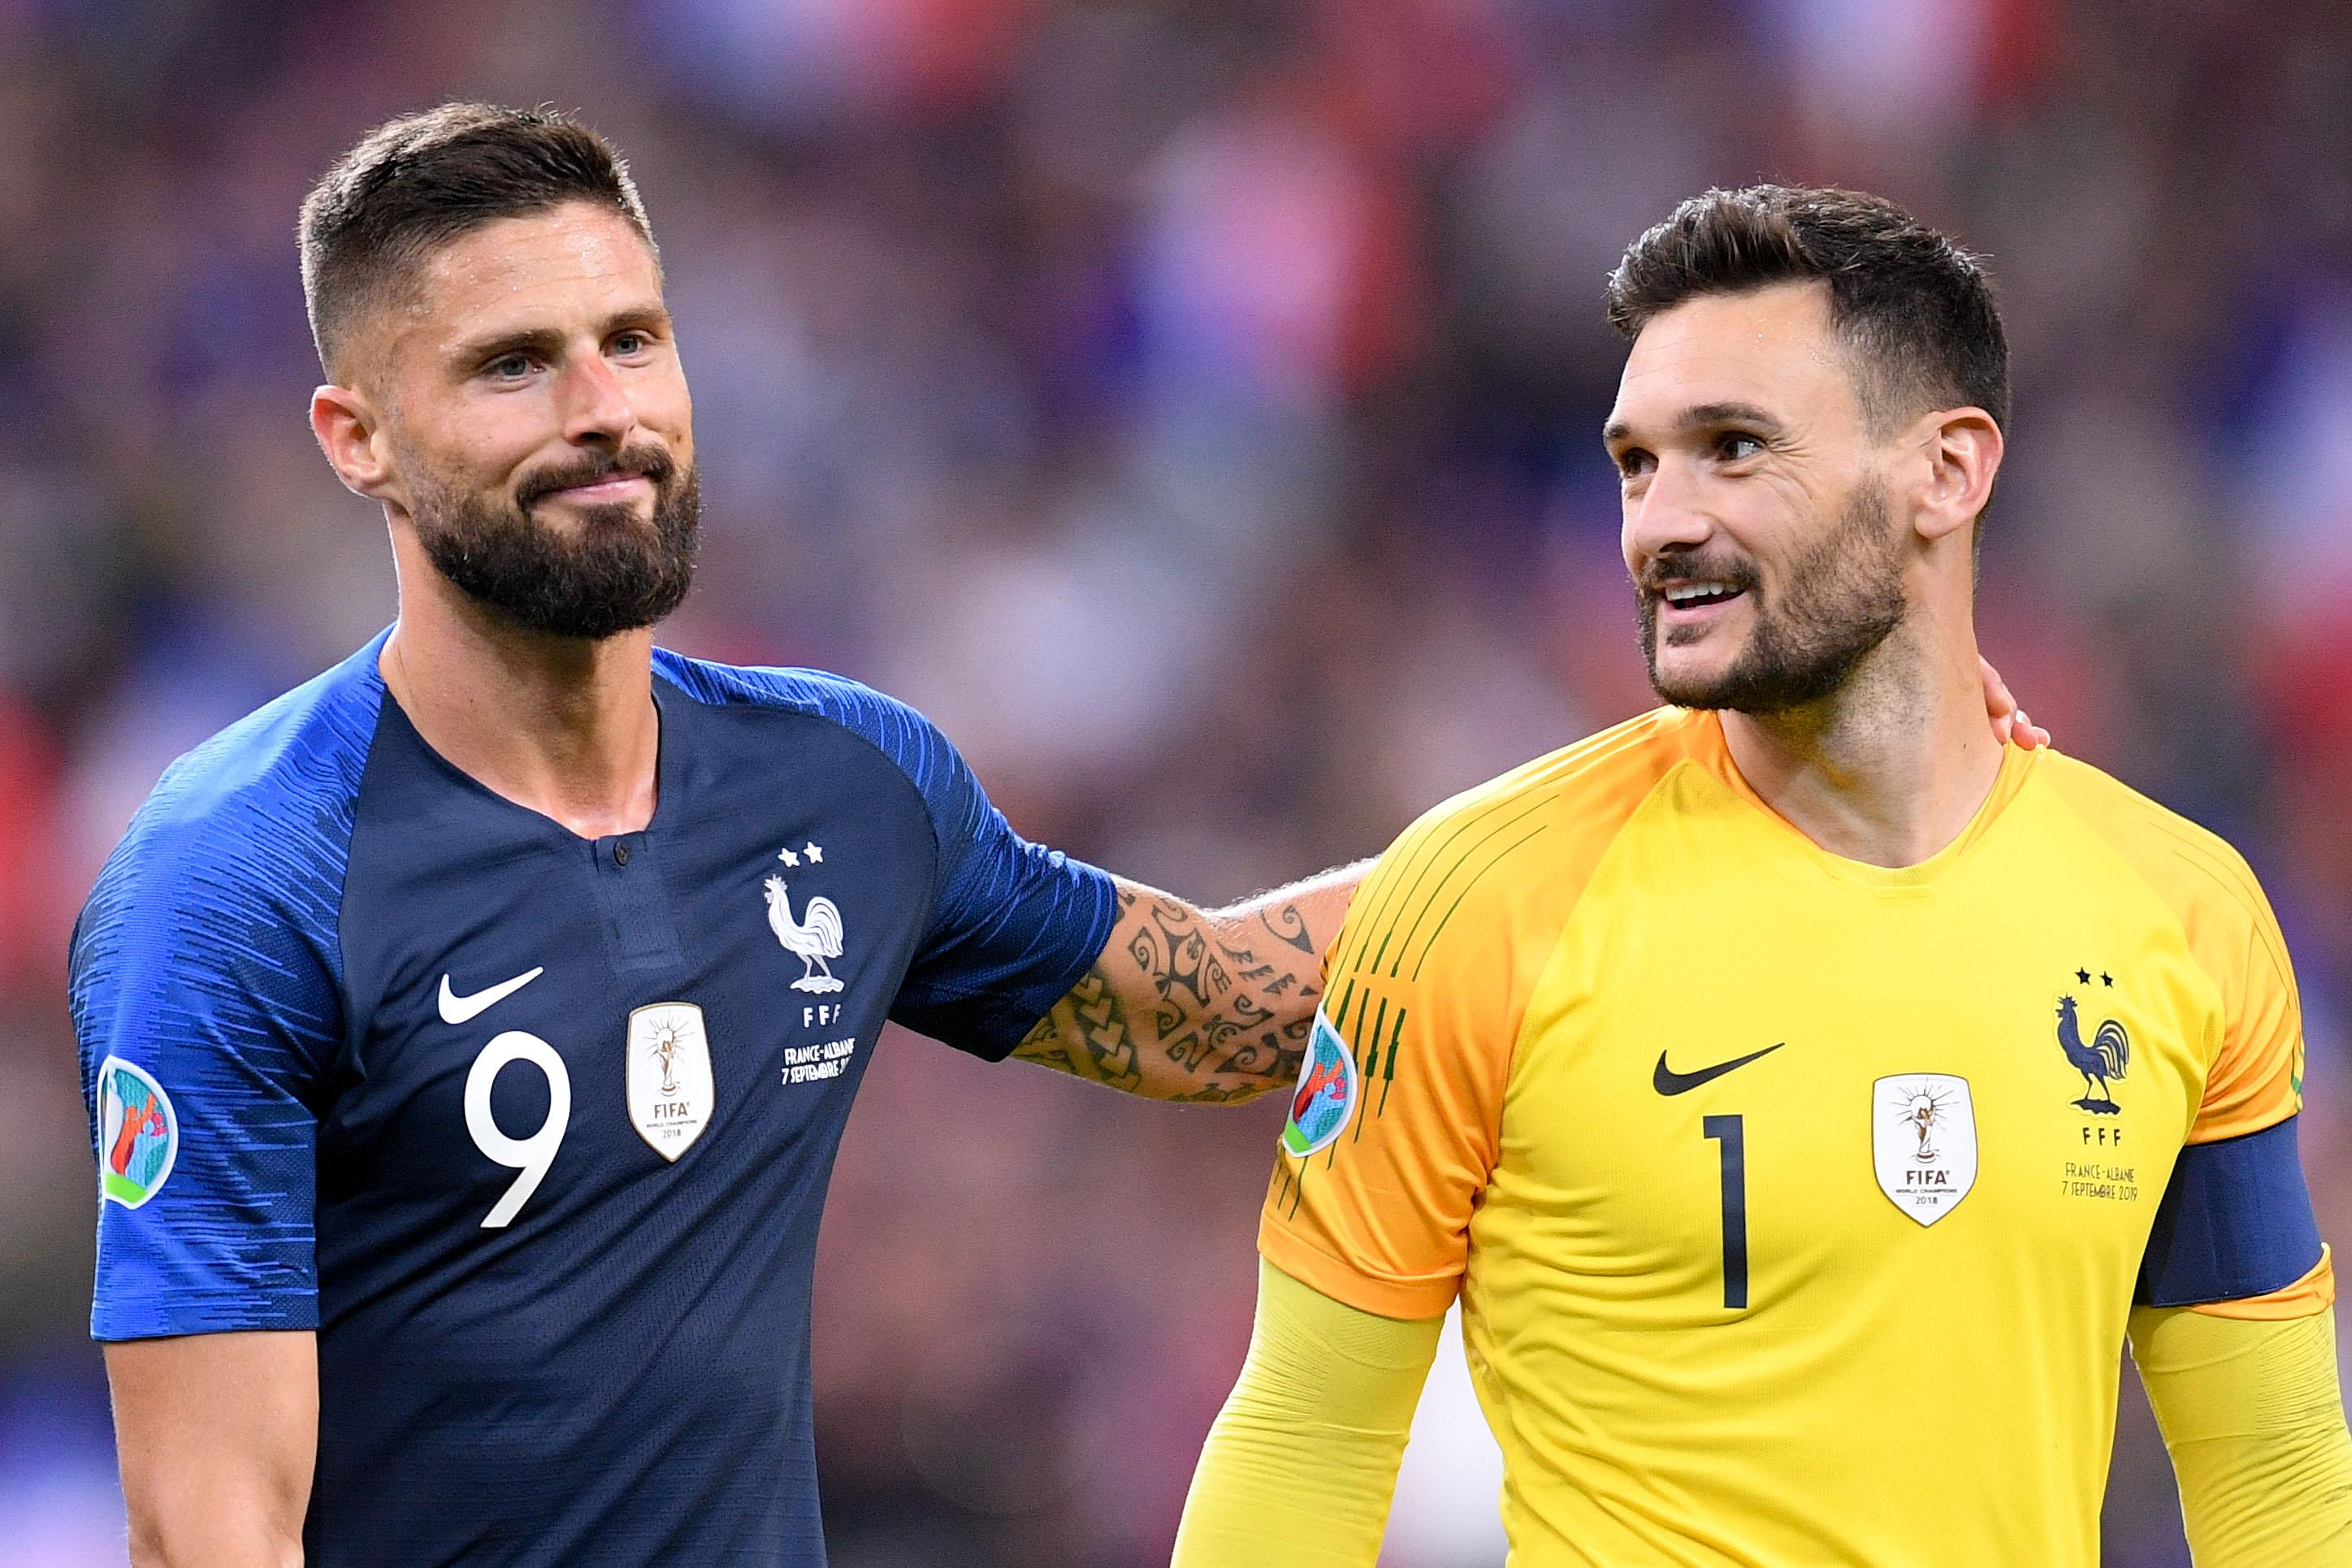 Mercato: Giroud announced close to joining Lloris in Los Angeles